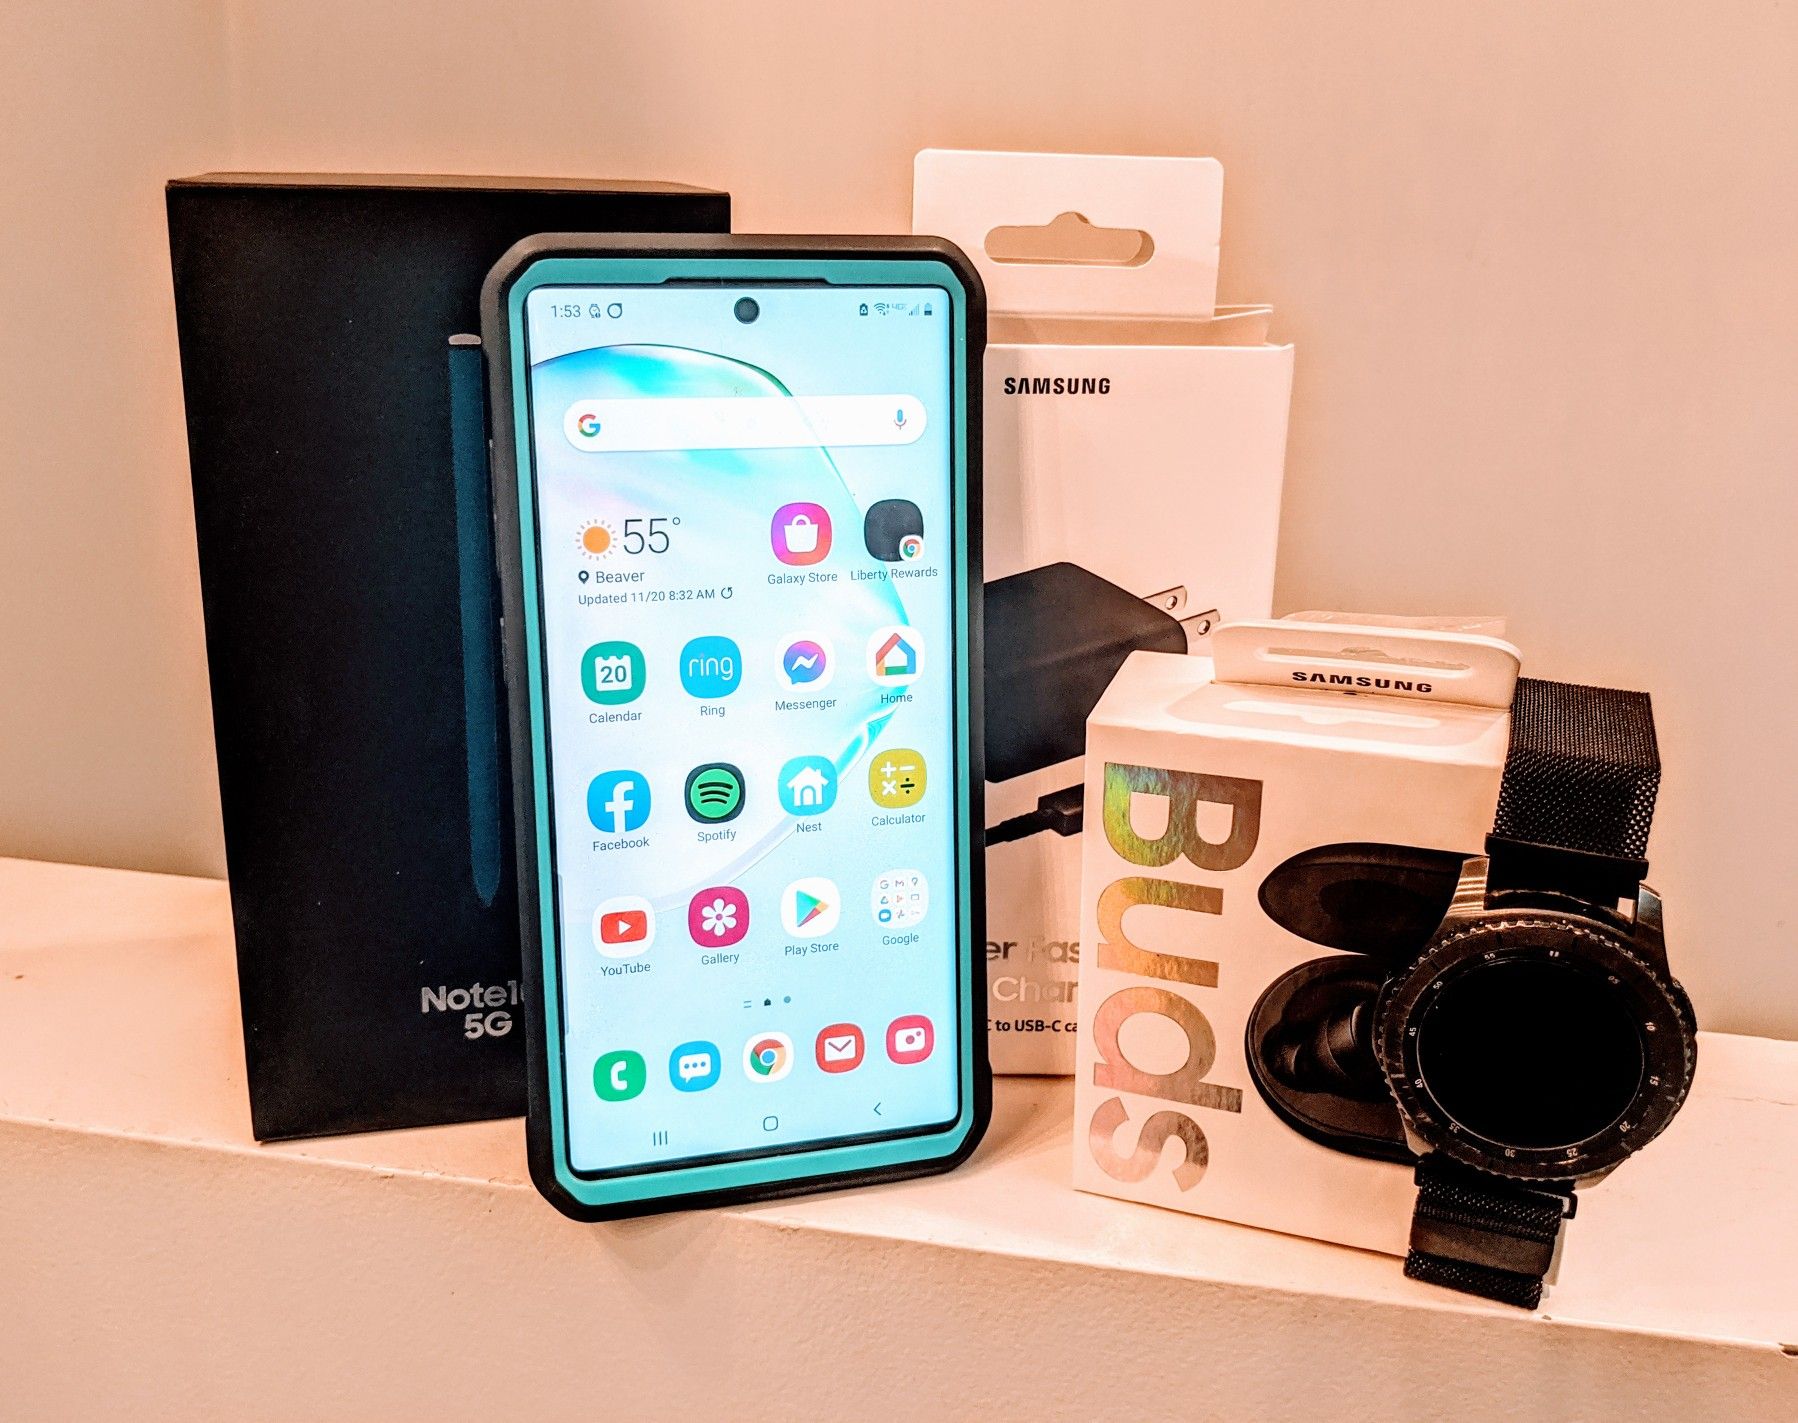 Samsung Galaxy Note 10+, Galaxy Buds, Gear S3 Frontier and extras